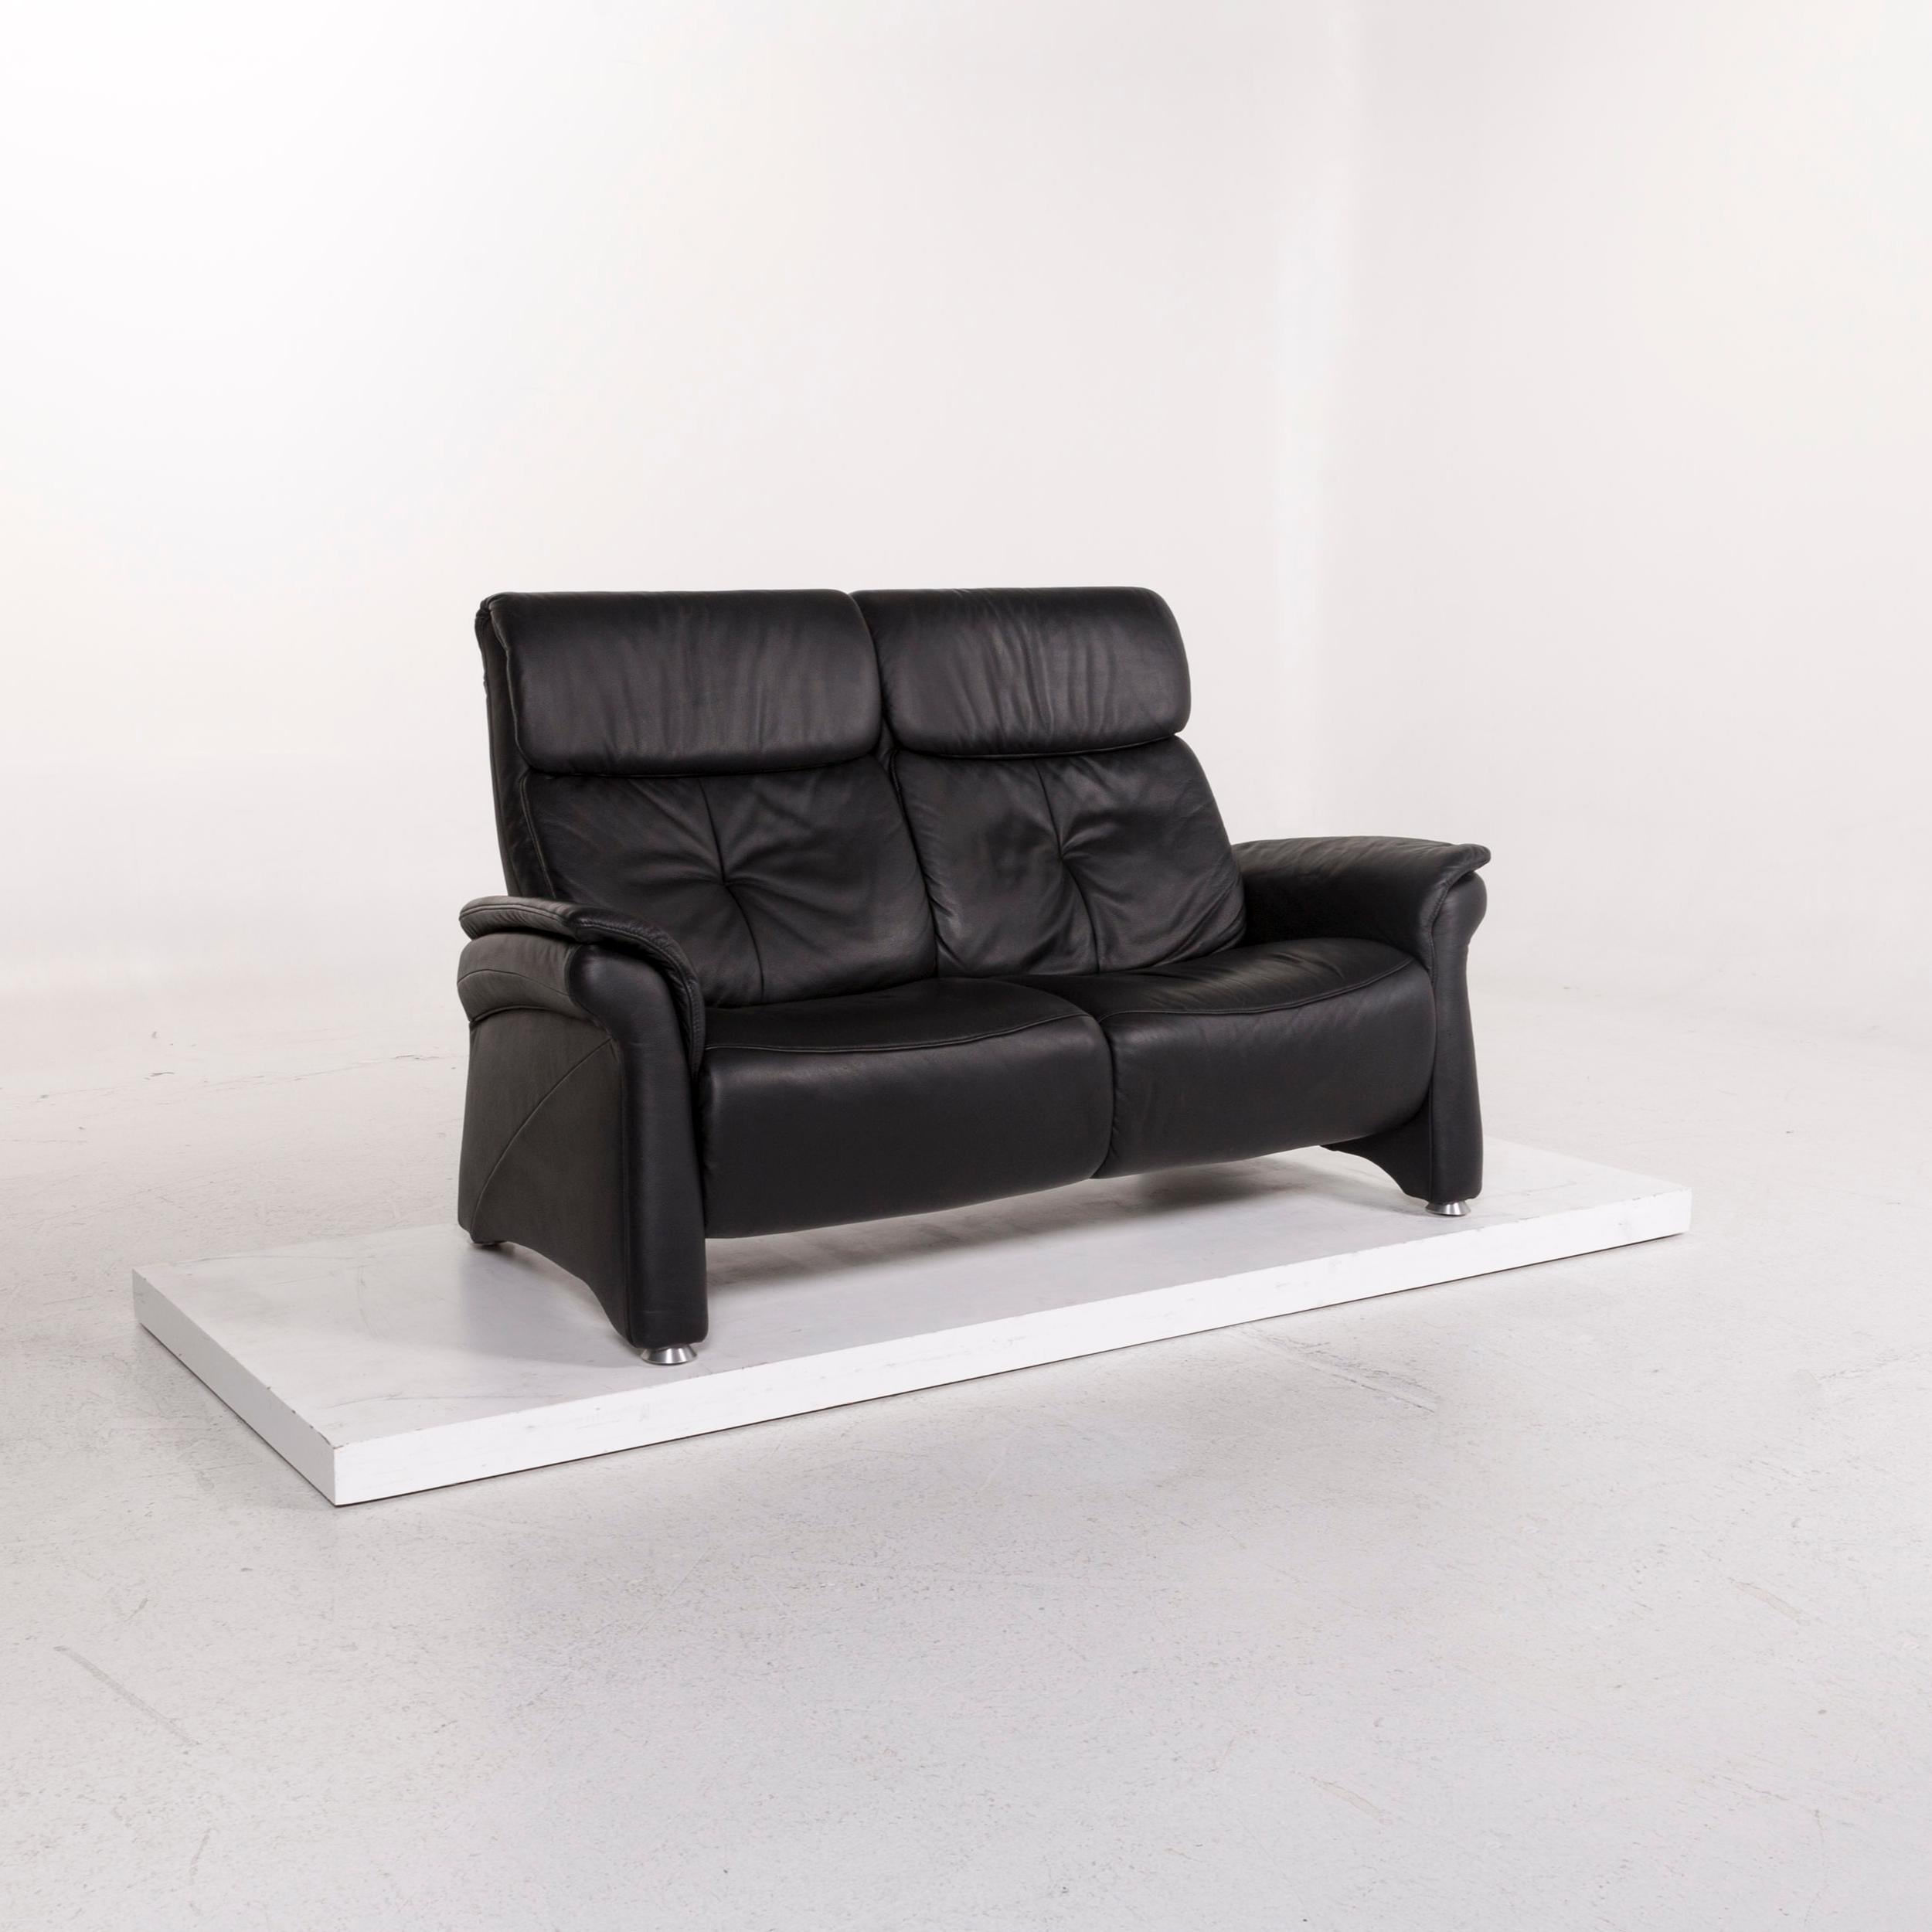 We bring to you a Mondo leather sofa black two-seat couch.

 

 Product measurements in centimeters:
 

Depth 86
Width 174
Height 107
Seat-height 44
Rest-height 62
Seat-depth 40
Seat-width 134
Back-height 65.